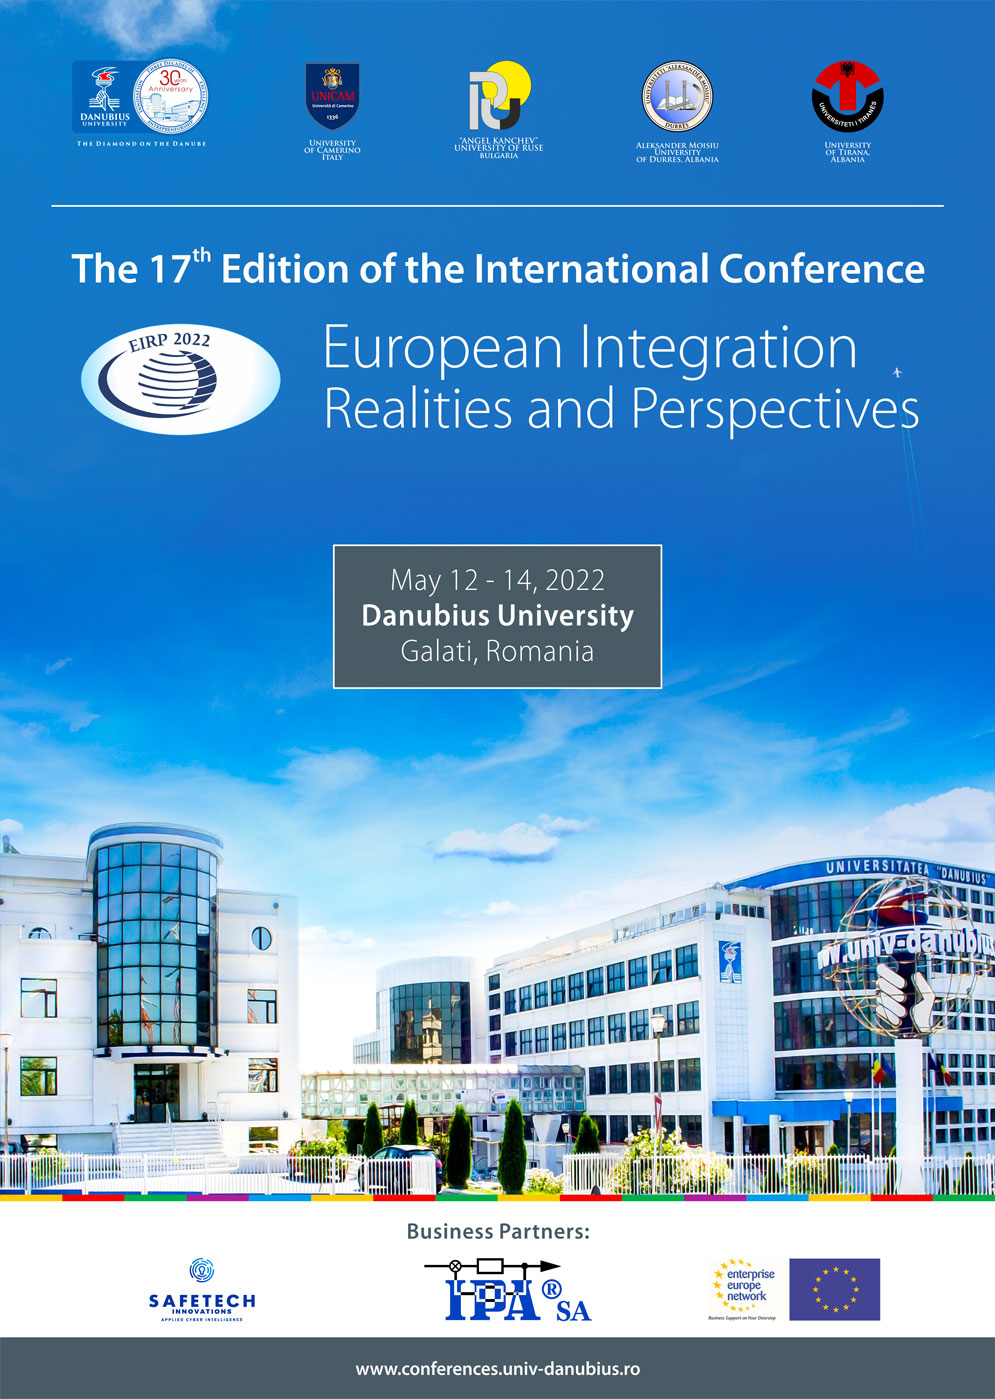 THE 17TH EDITION OF INTERNATIONAL CONFERENCE EUROPEAN INTEGRATION. REALITIES AND PERSPECTIVES – EIRP 